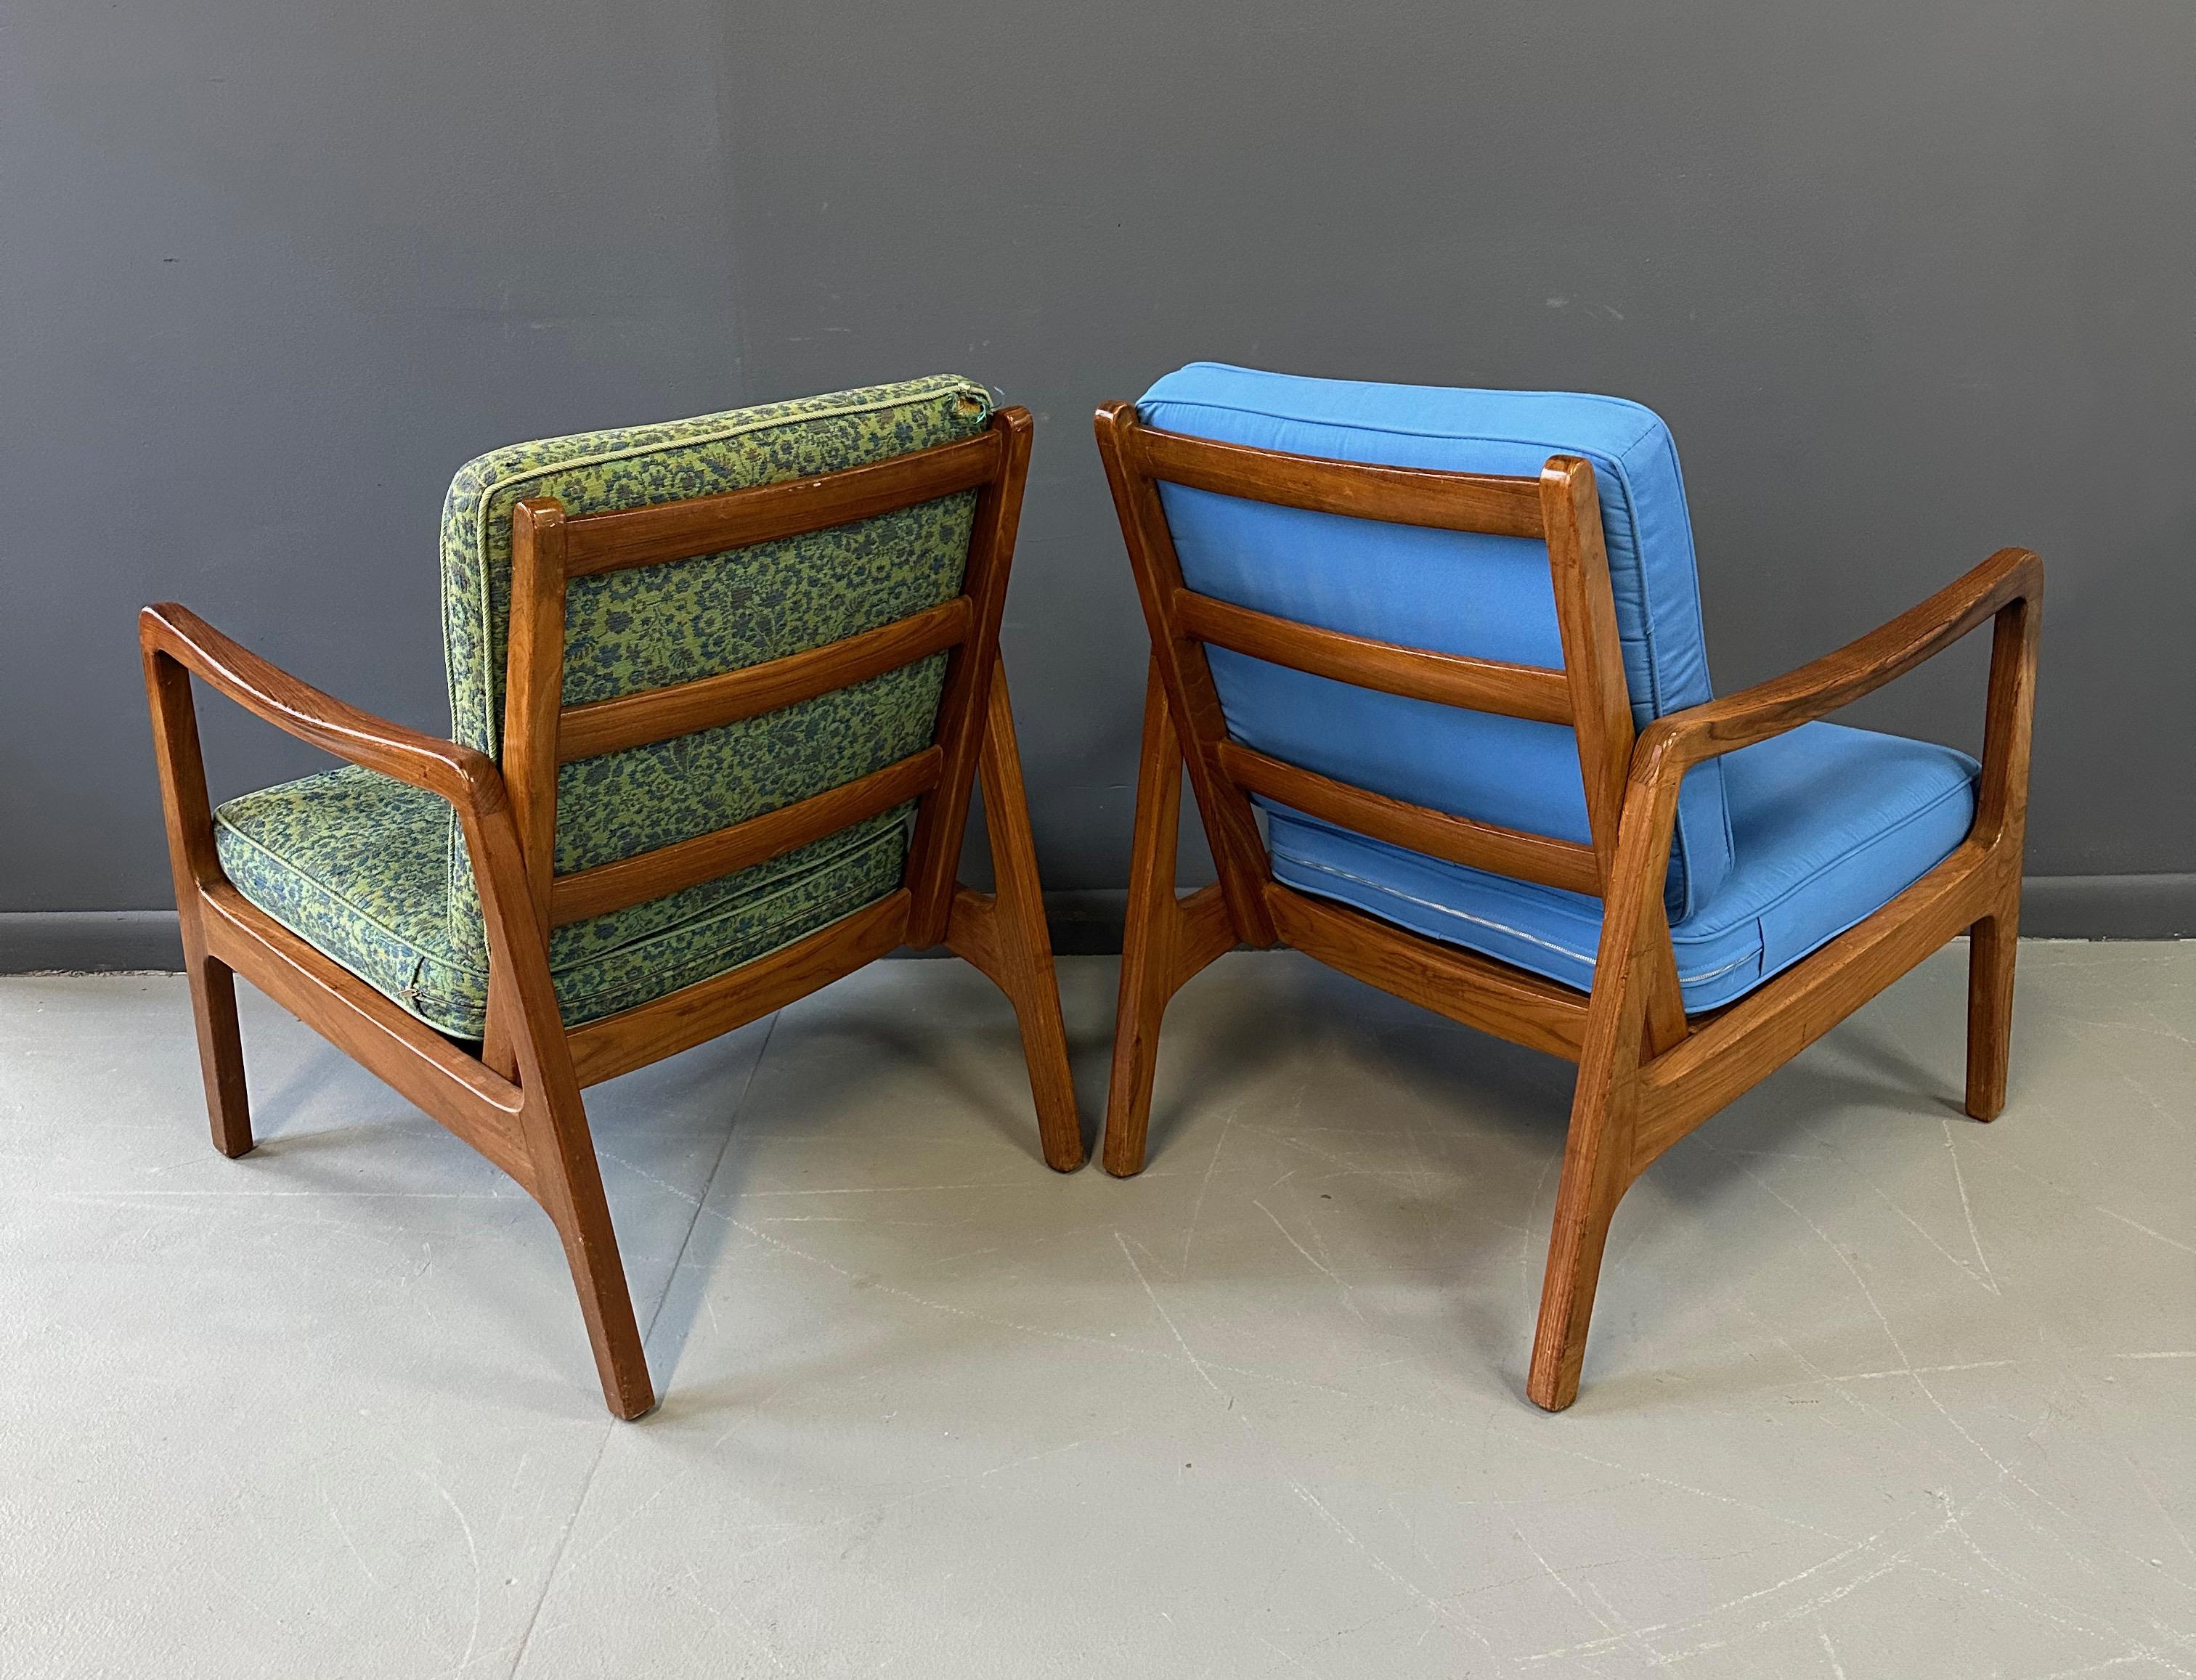 20th Century Pair of Danish Teak Easy Chair by Ole Wanscher, 1950s with Ottoman Midcentury For Sale